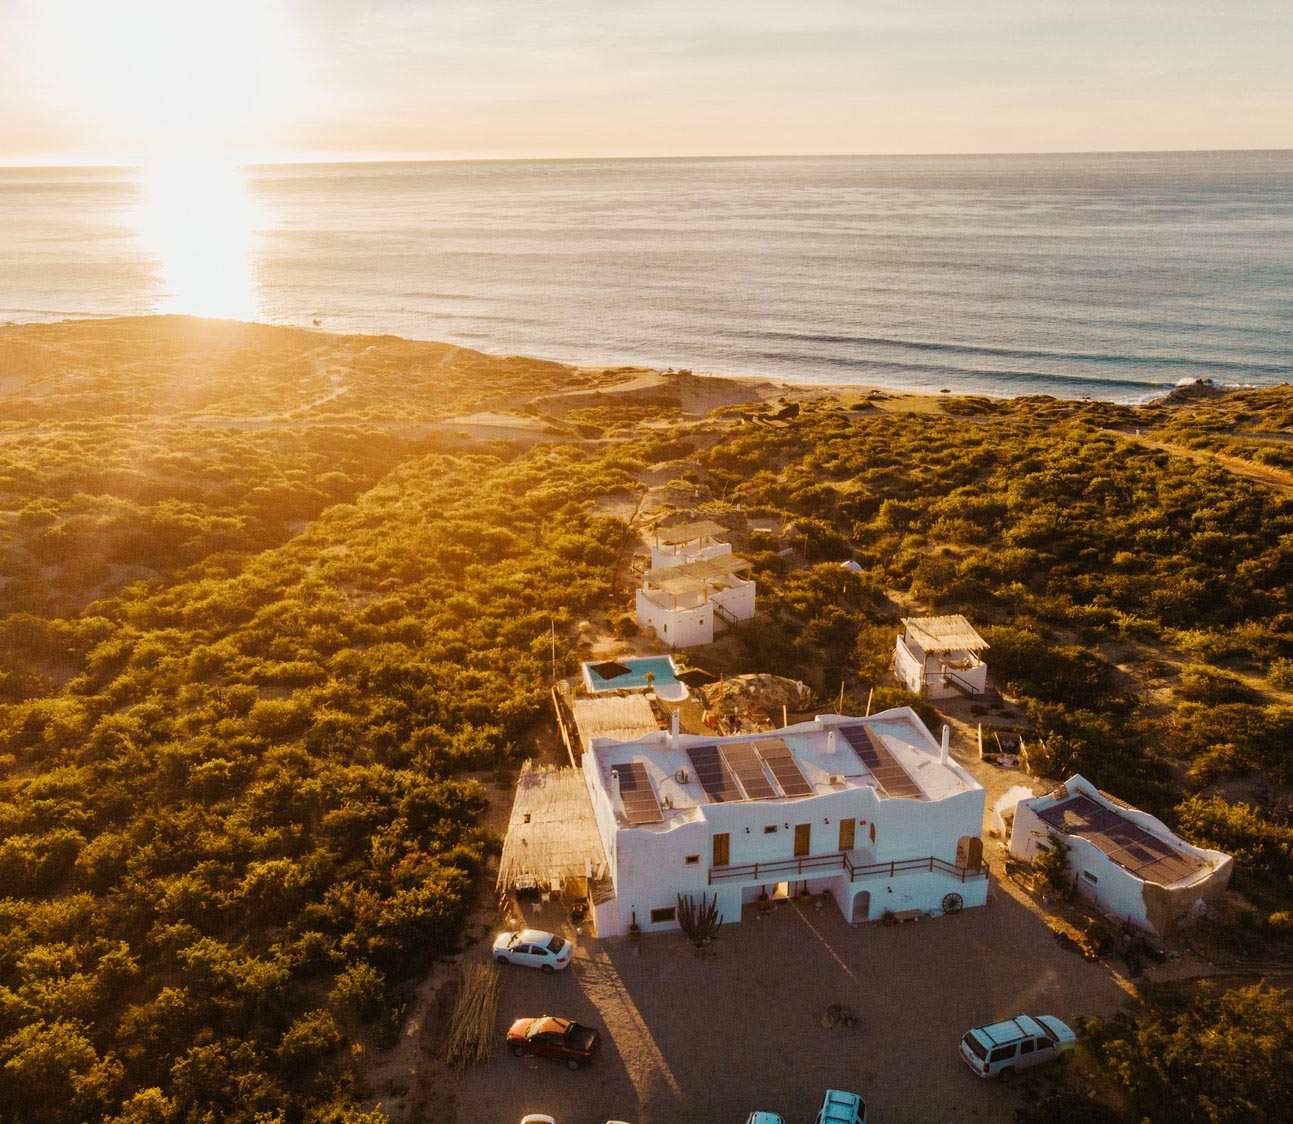 The White Lodge in Baja, Mexico - featured